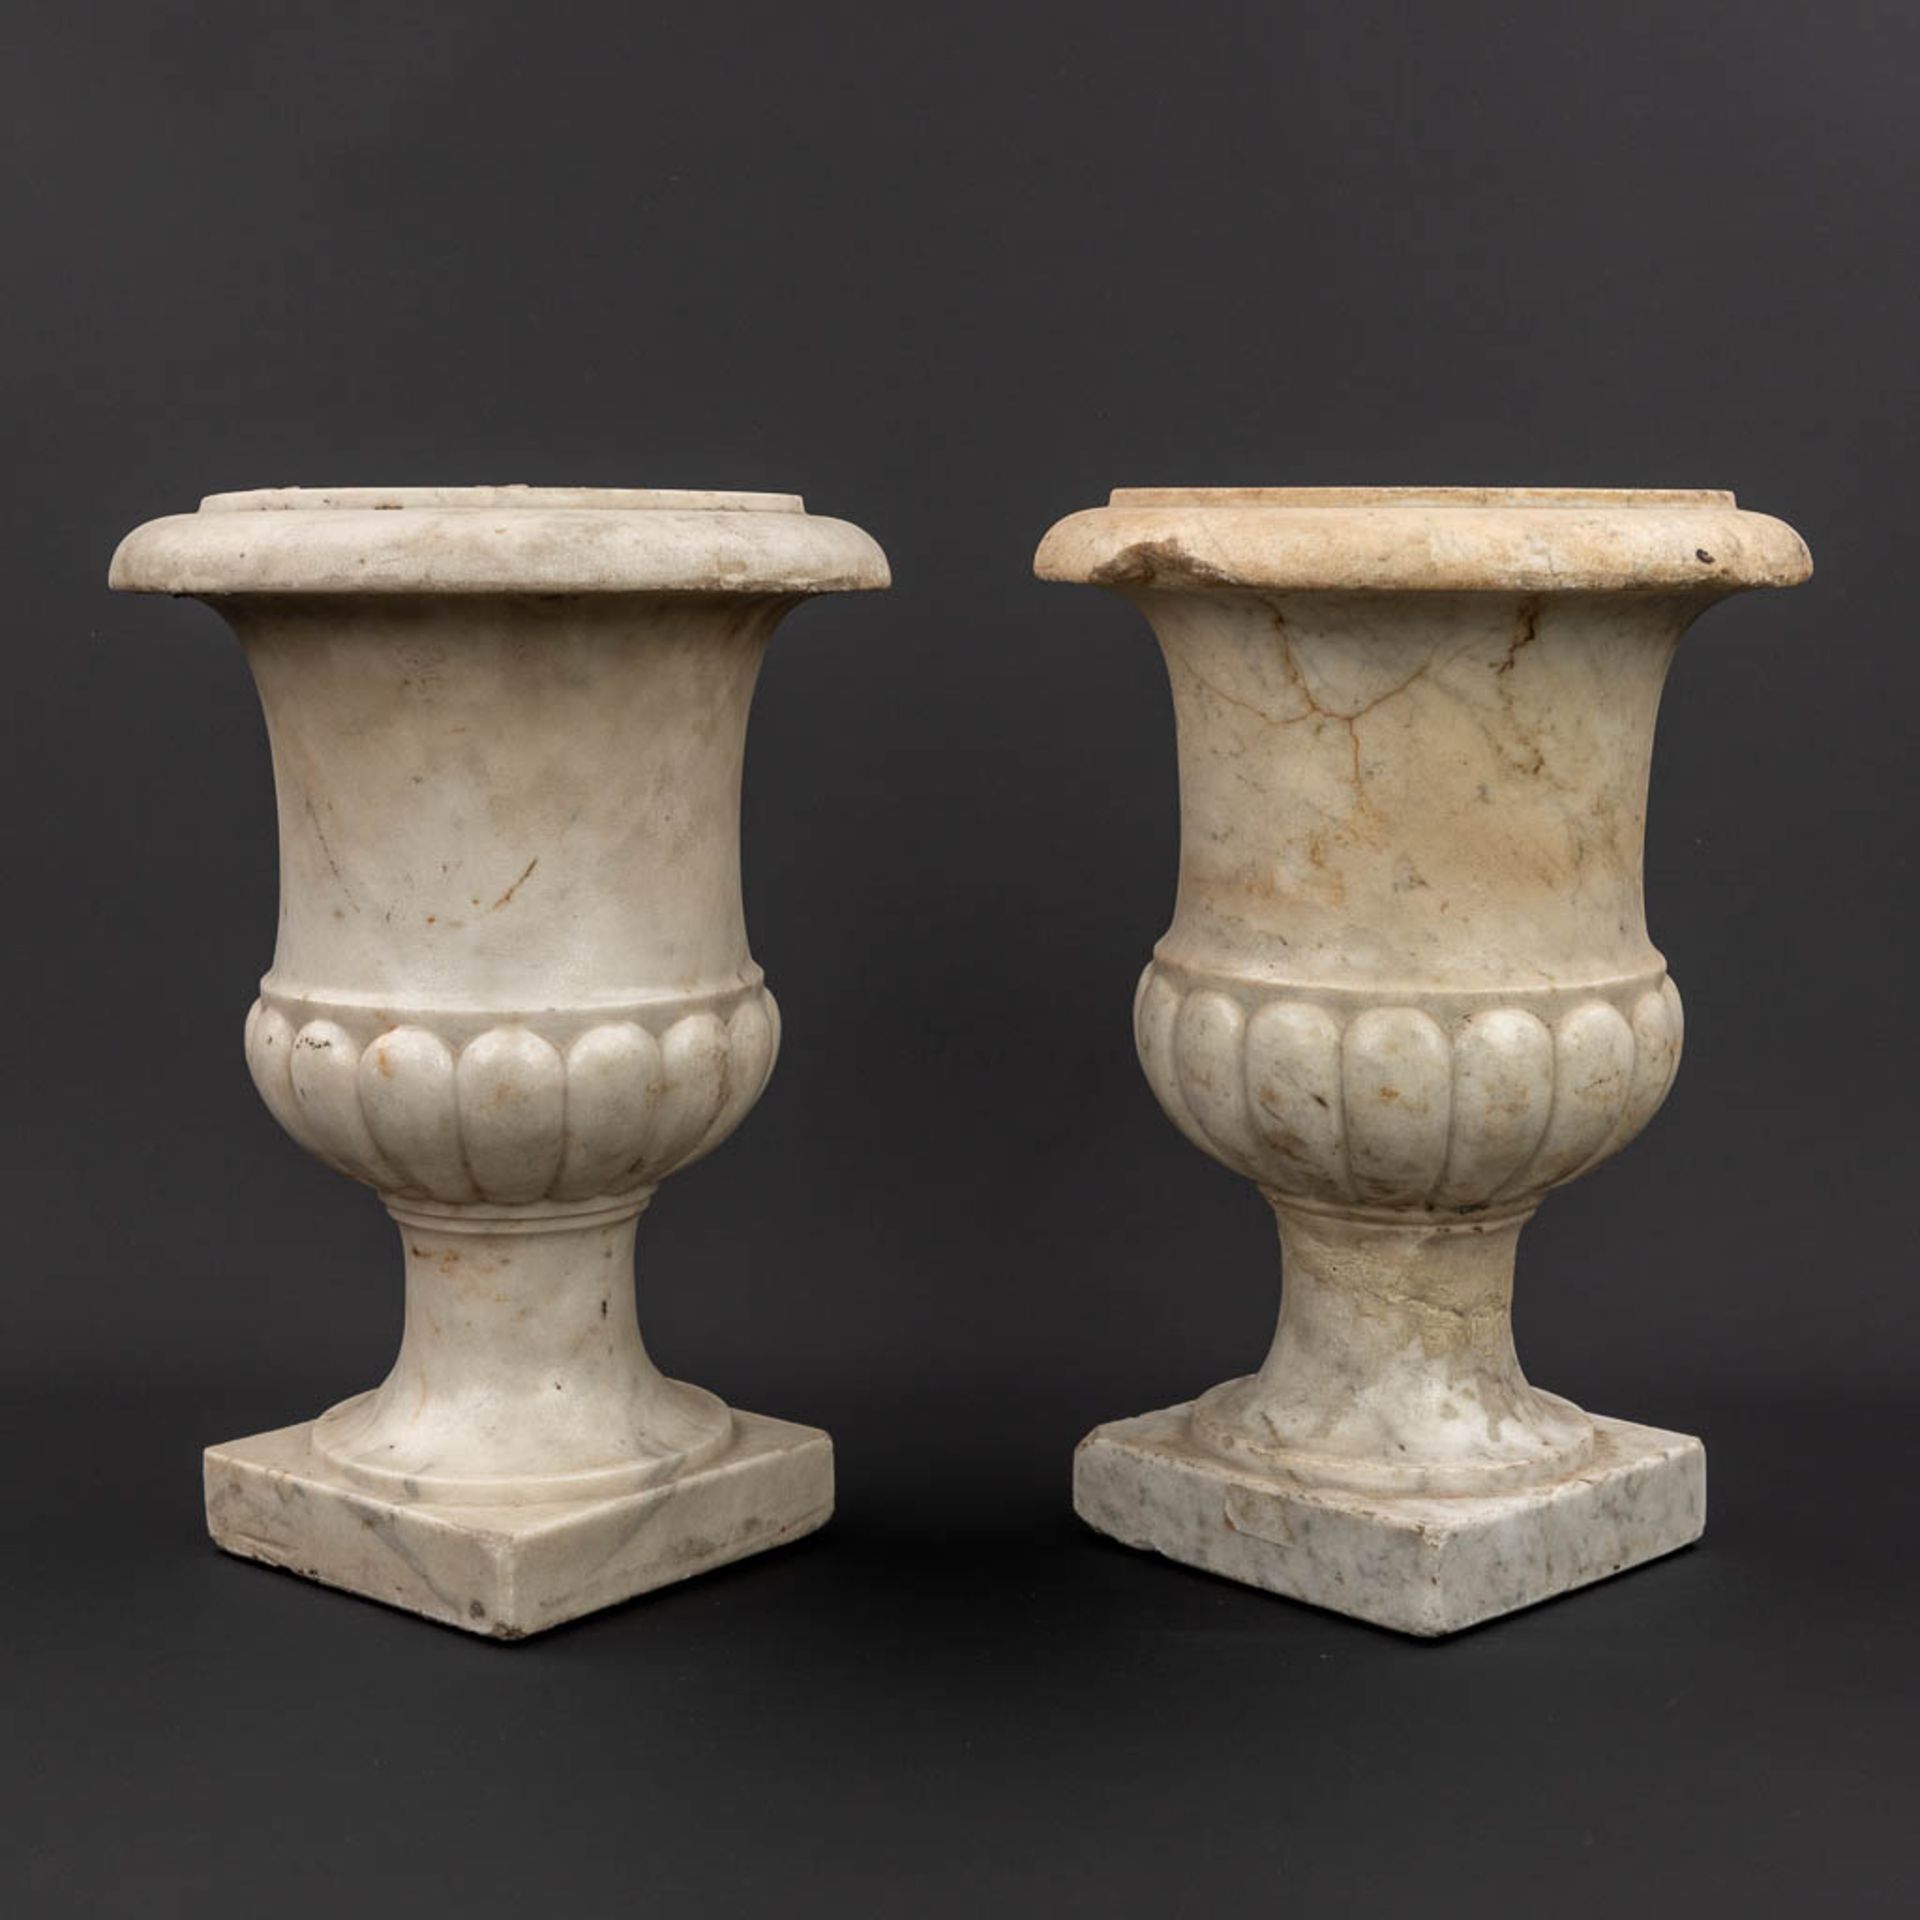 A pair of marble urns 'Medici Vases' made of sculptured marble, 18th C. (H:36 x D:26 cm) - Image 2 of 11